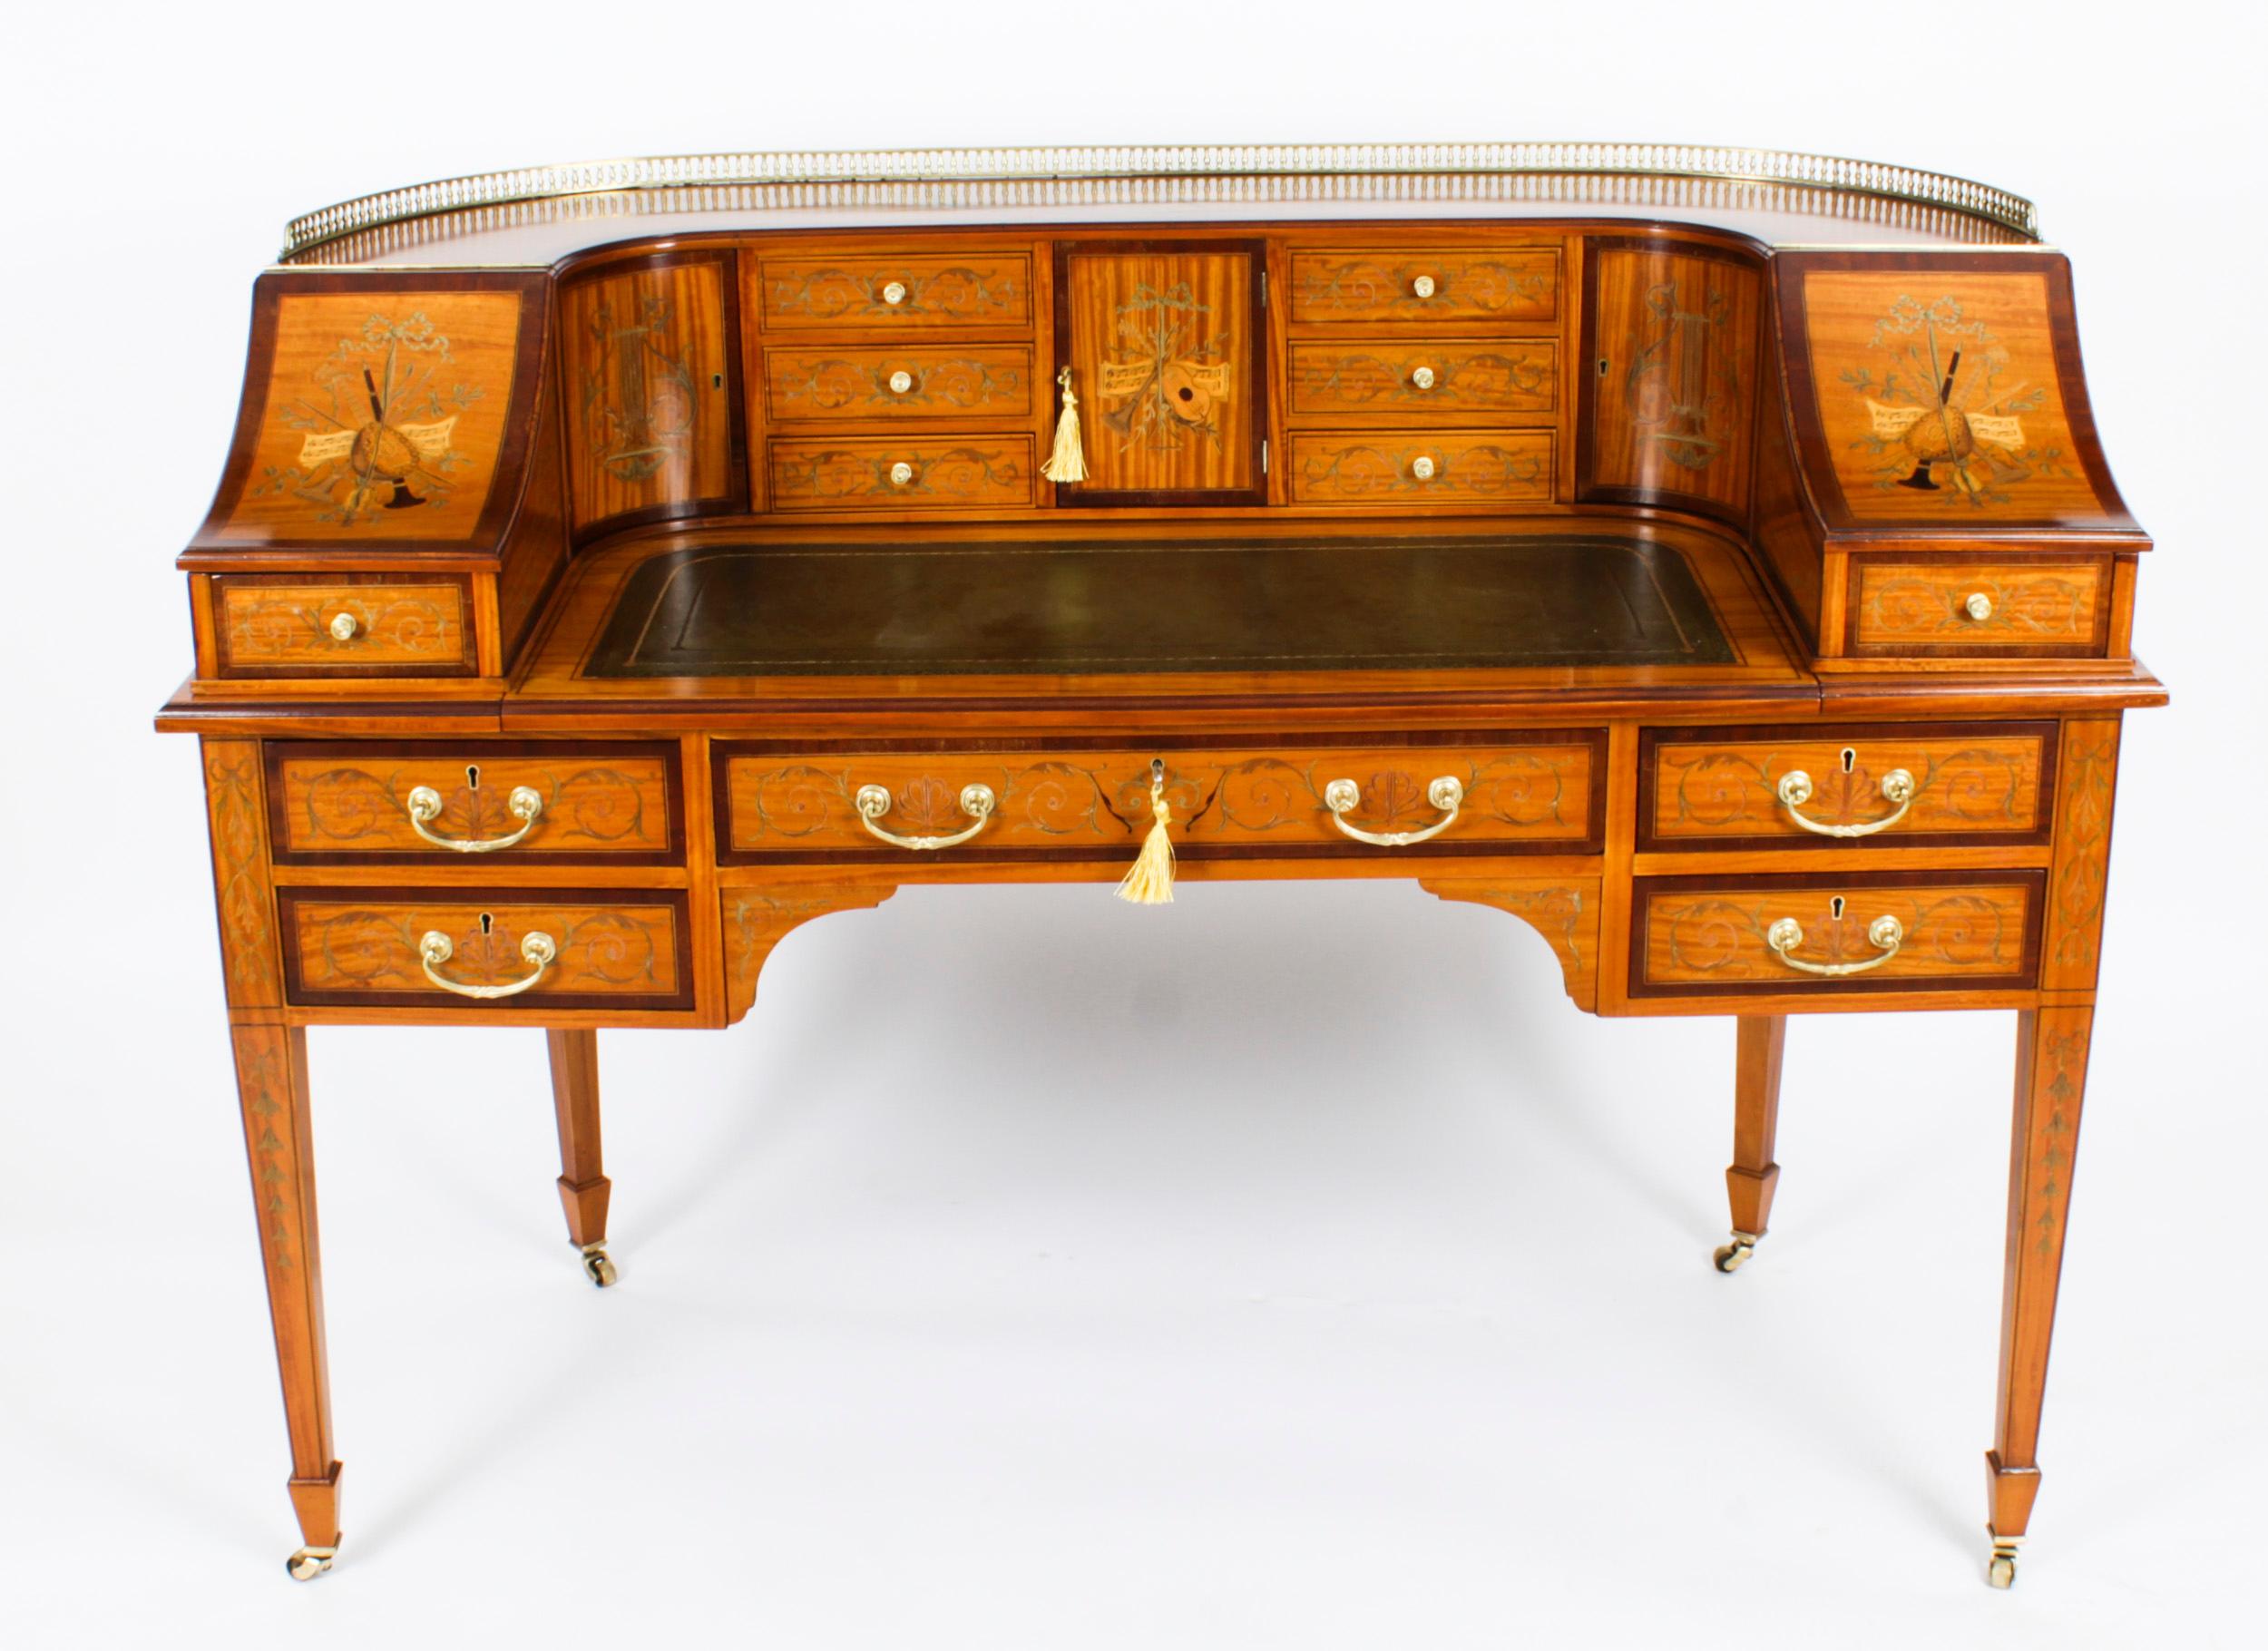 This is a beautiful antique late Victorian satinwood Carlton House Desk, by the renowned retailer and cabinet maker Druce & Co, circa 1880 in date.
 
This beautiful desk is made from satinwood, which has been bordered with boxwood and ebony lines